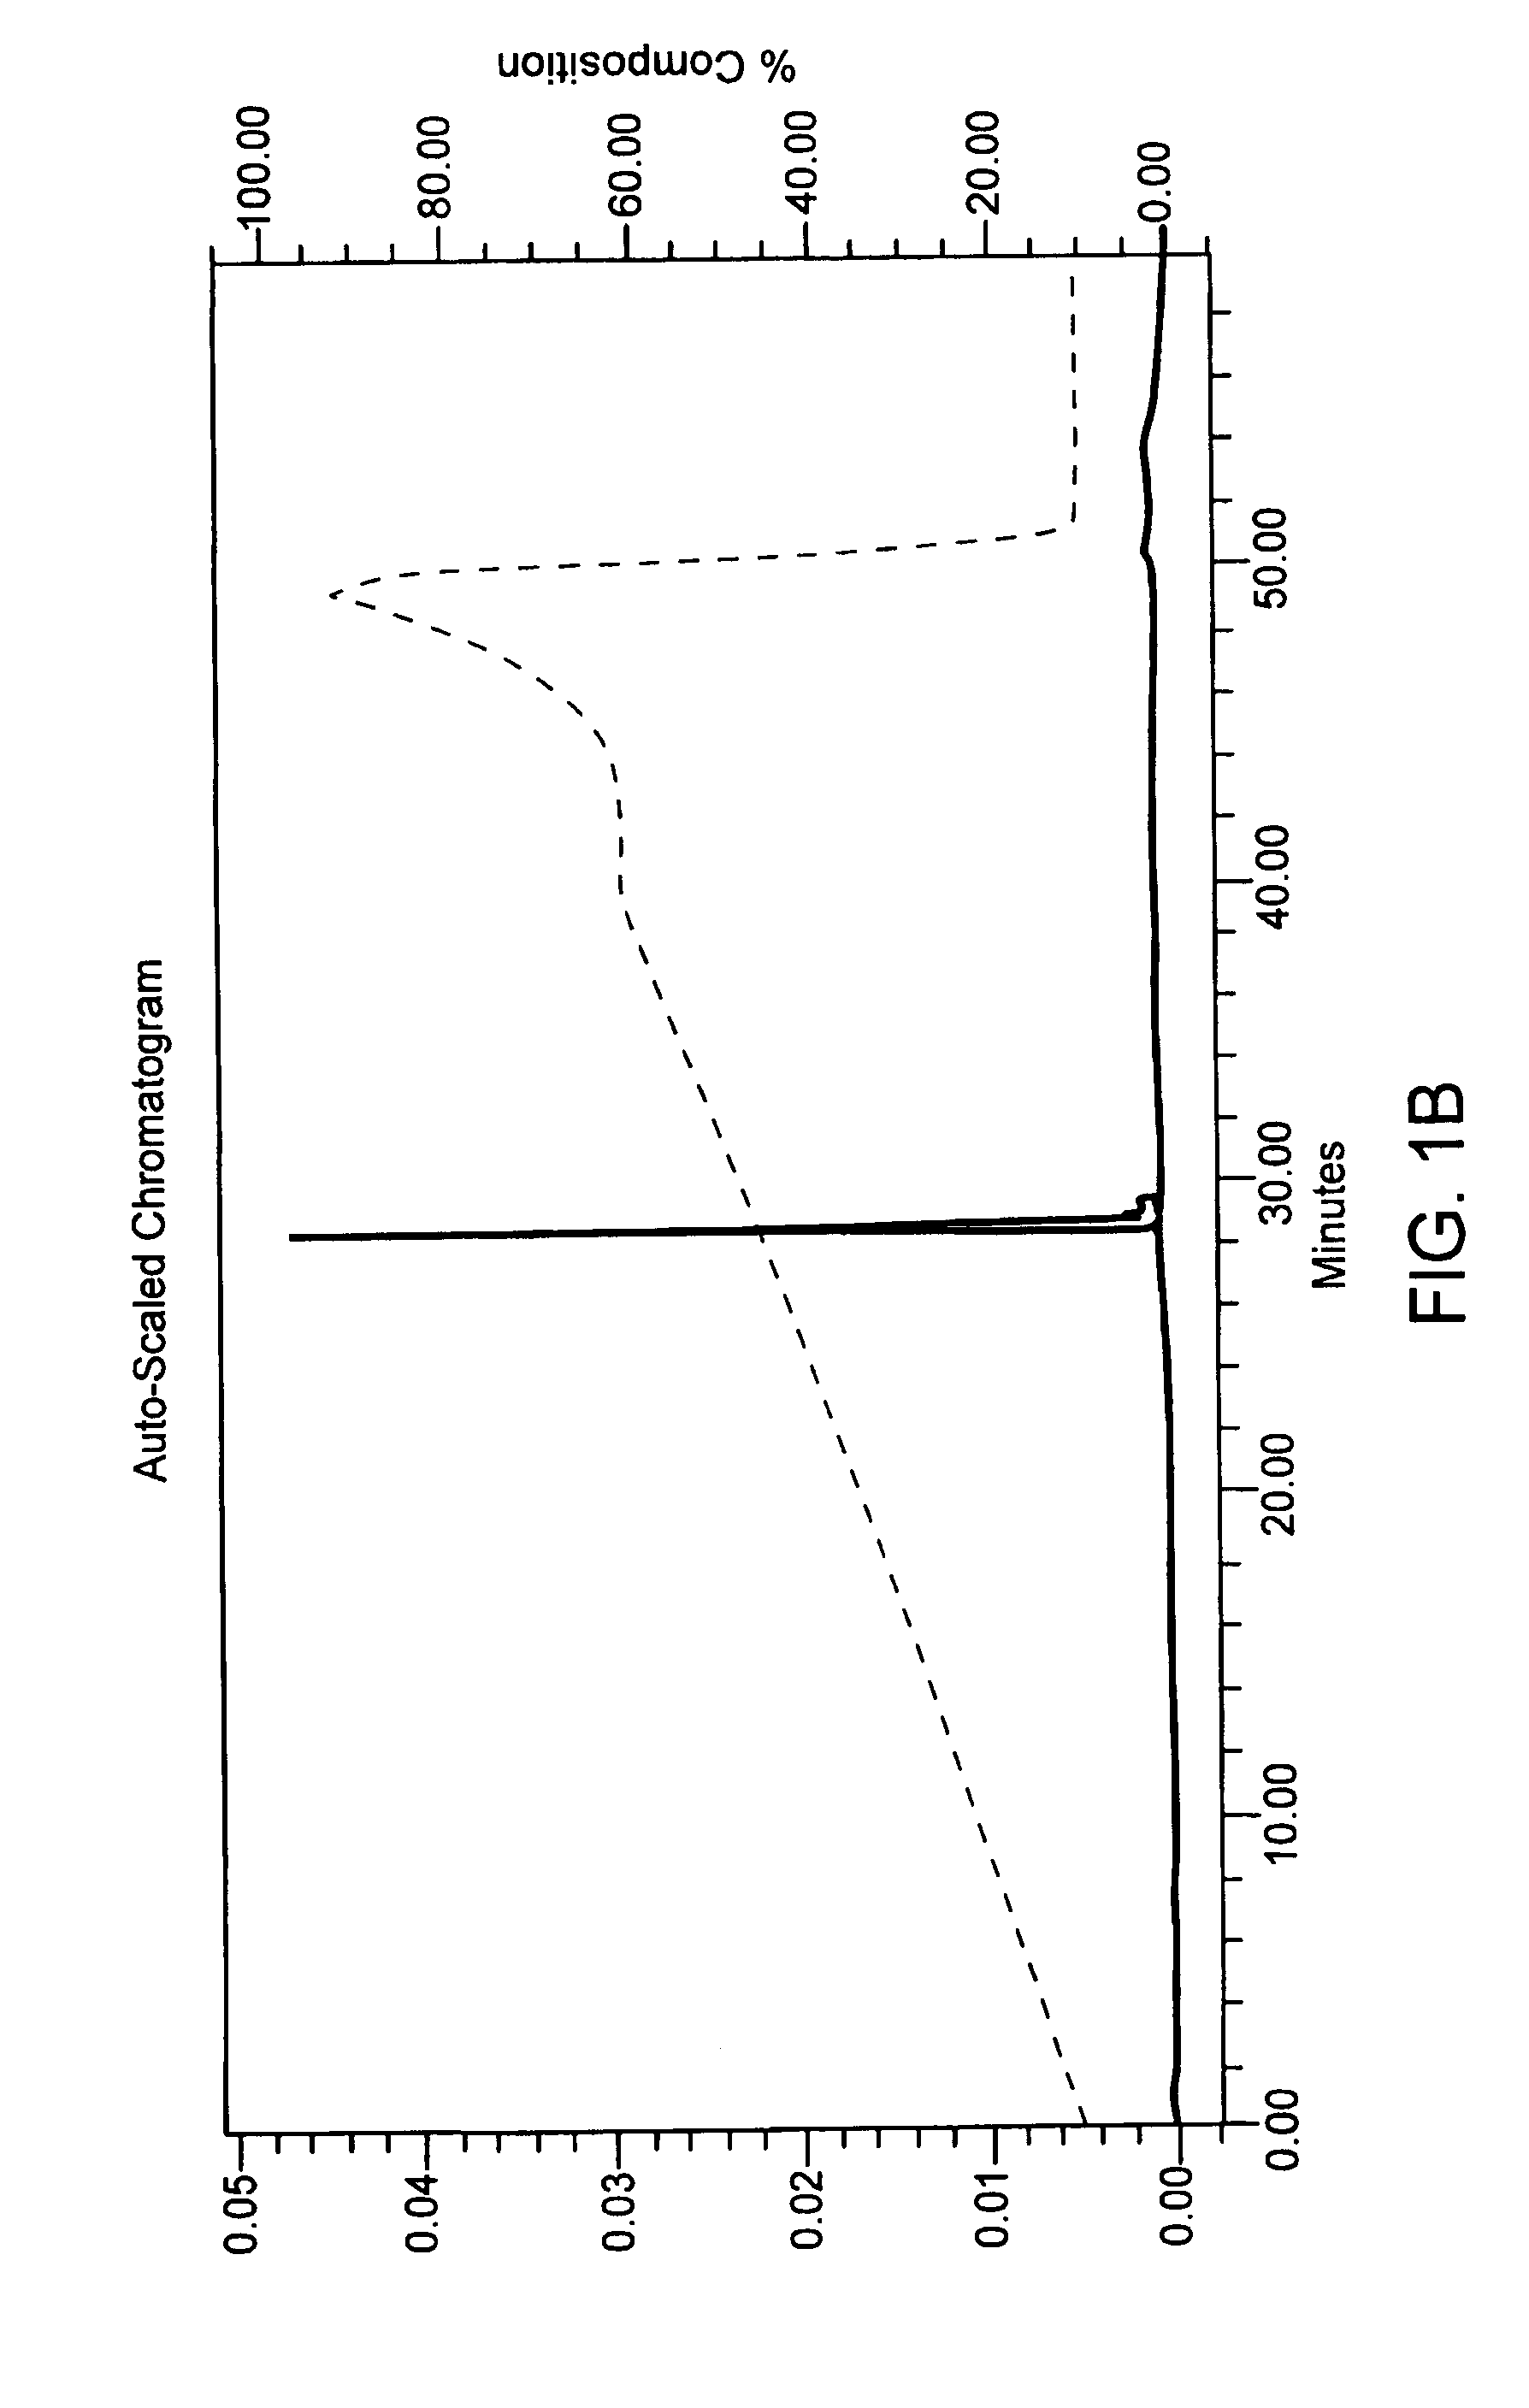 Method of preventing modification of synthetic oligonucleotides